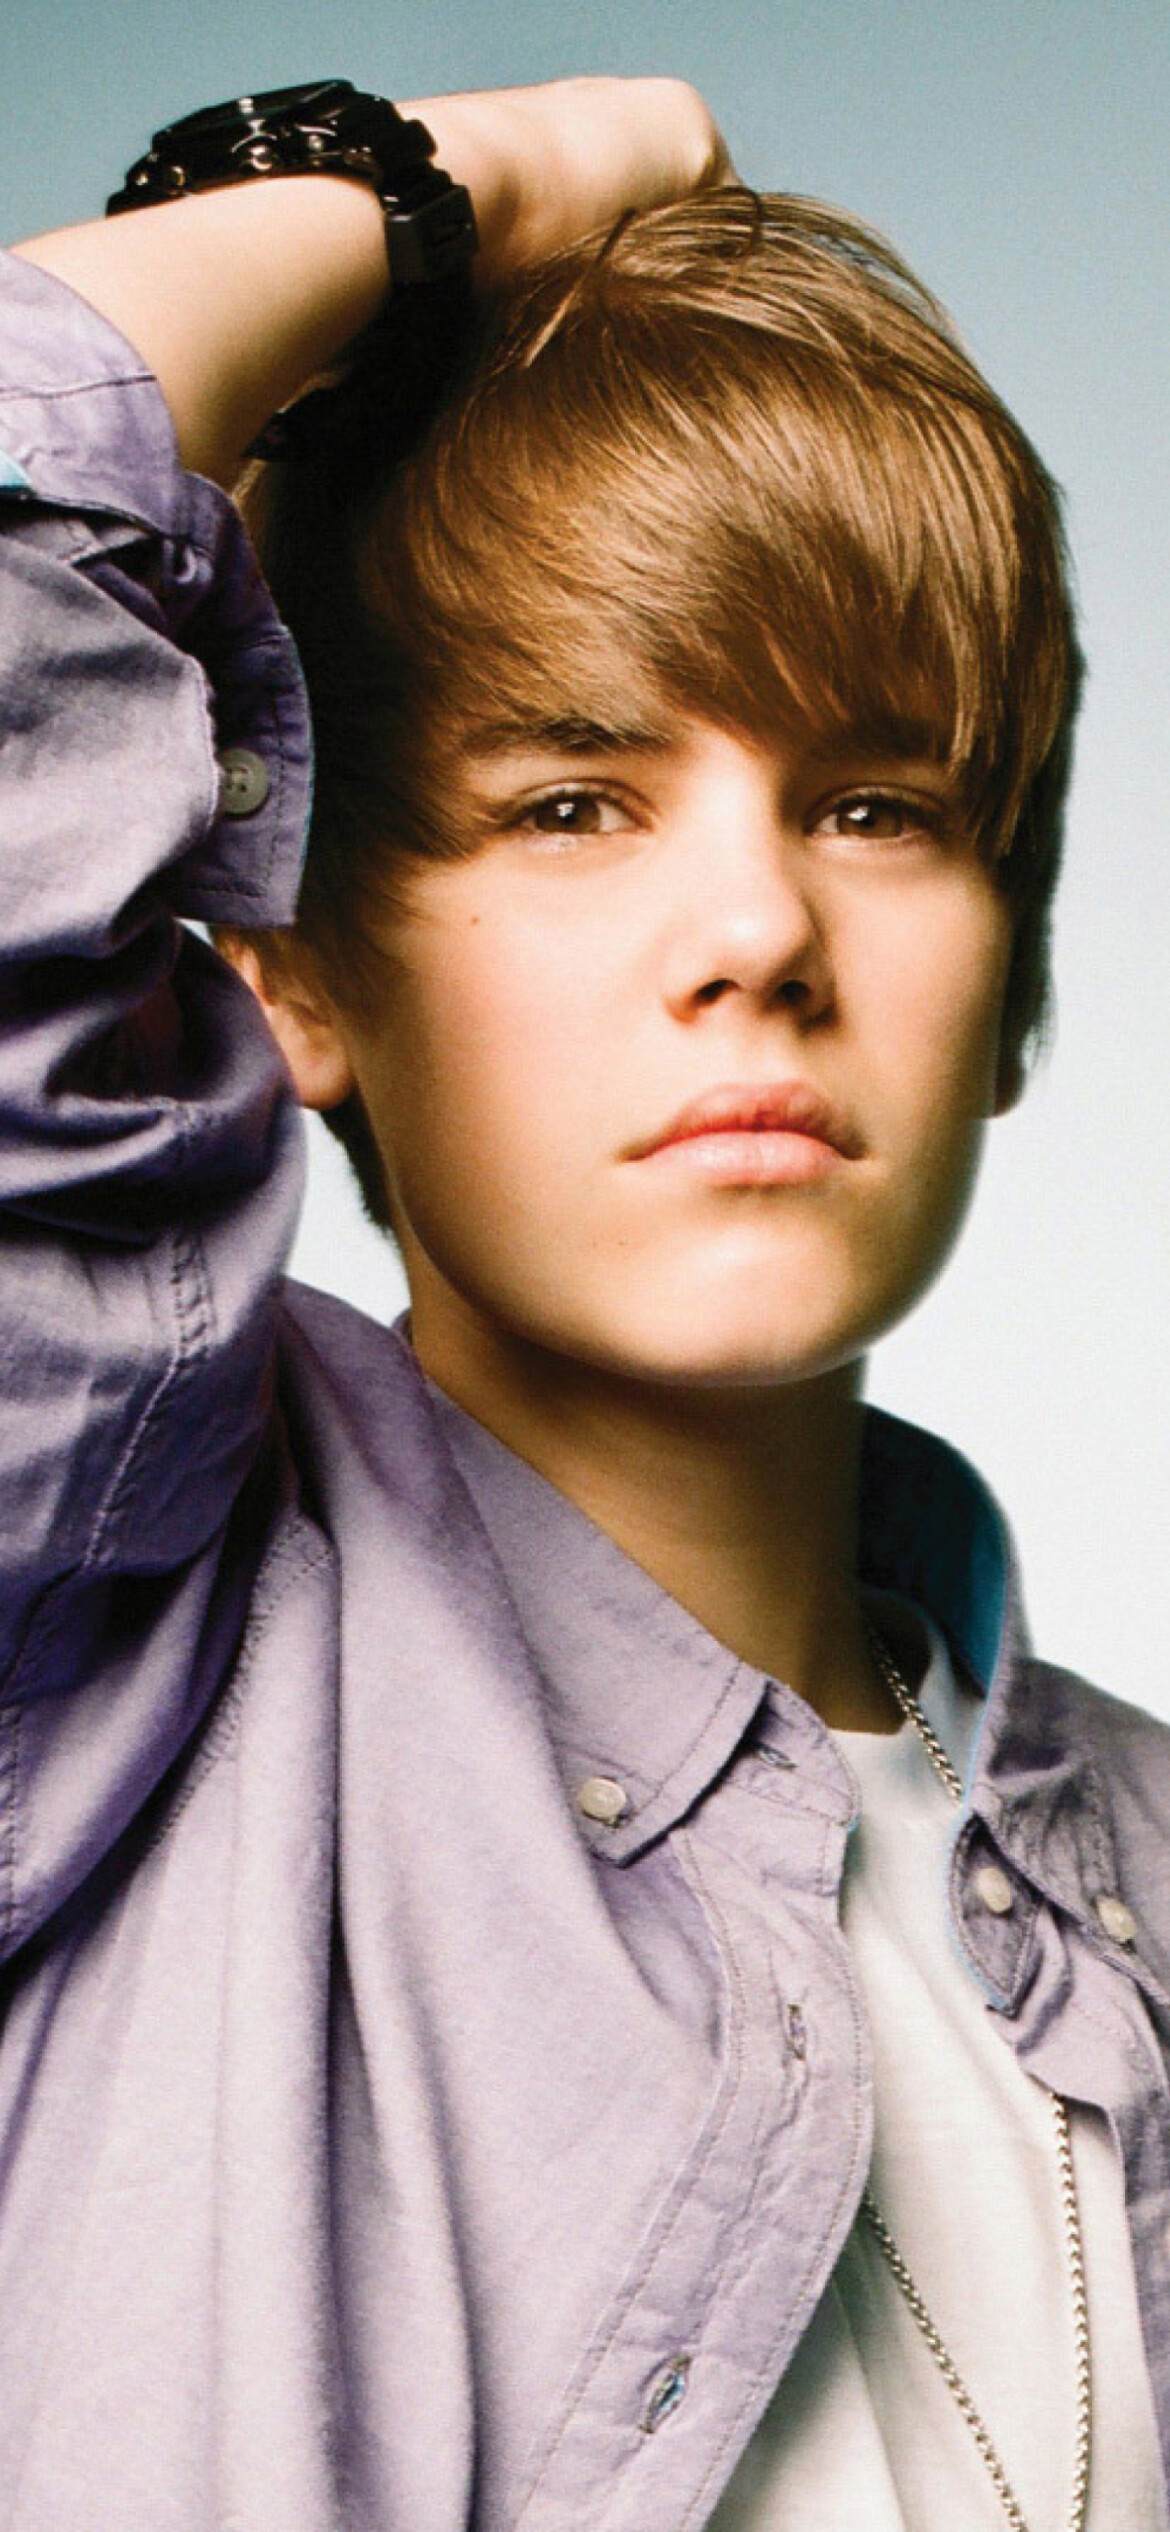 Justin Bieber: A Canadian pop singer, A guest star on the TV show CSI. 1170x2540 HD Background.